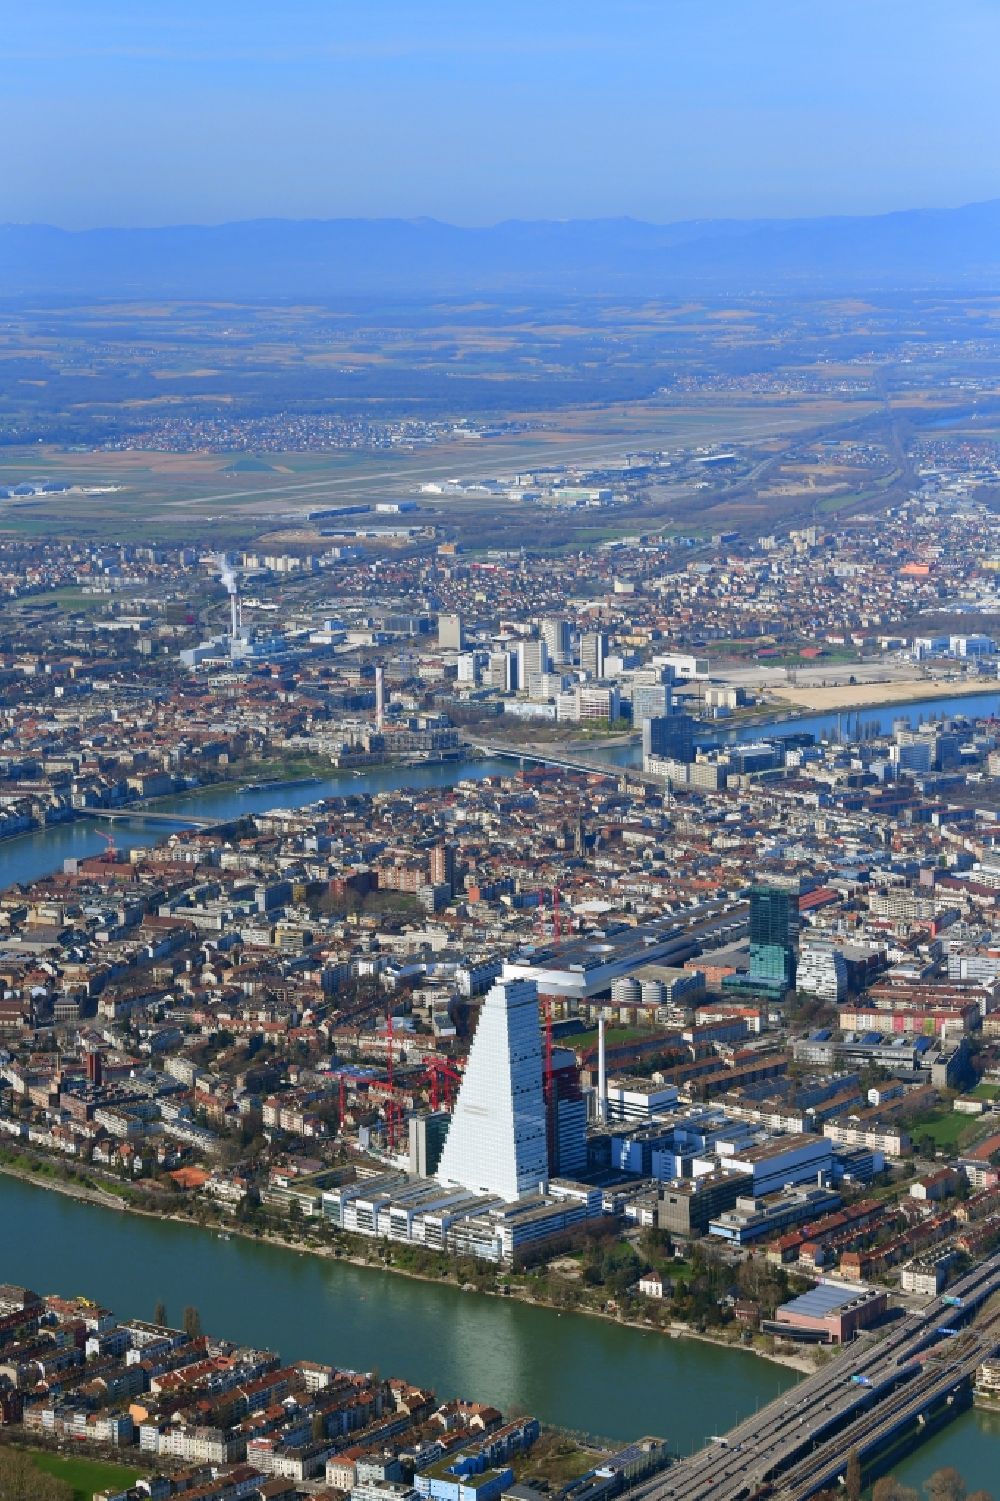 Aerial image Basel - City view with the impressive Roche Tower and the river Rhine in Basle, Switzerland